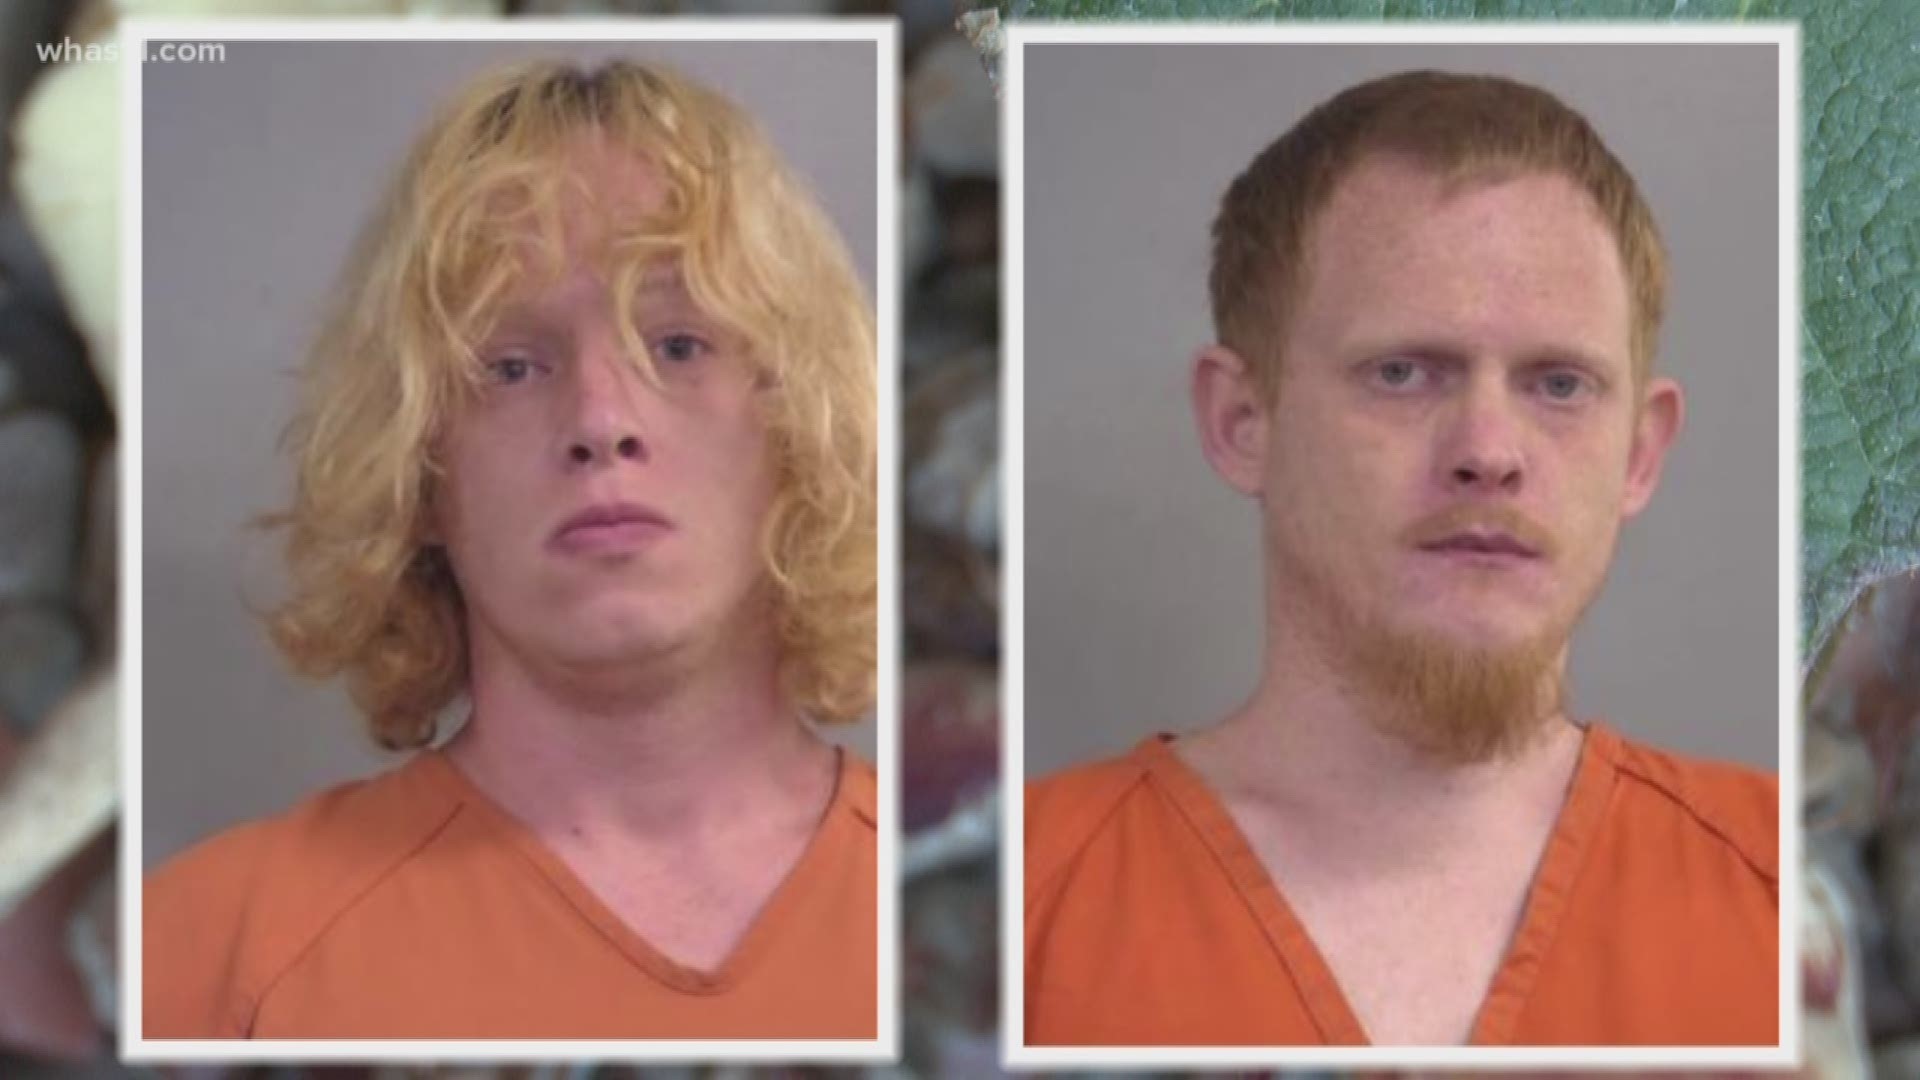 Police have arrested 29-year-old Griffin Hardwick and 28-year-old Phillip Patterson.